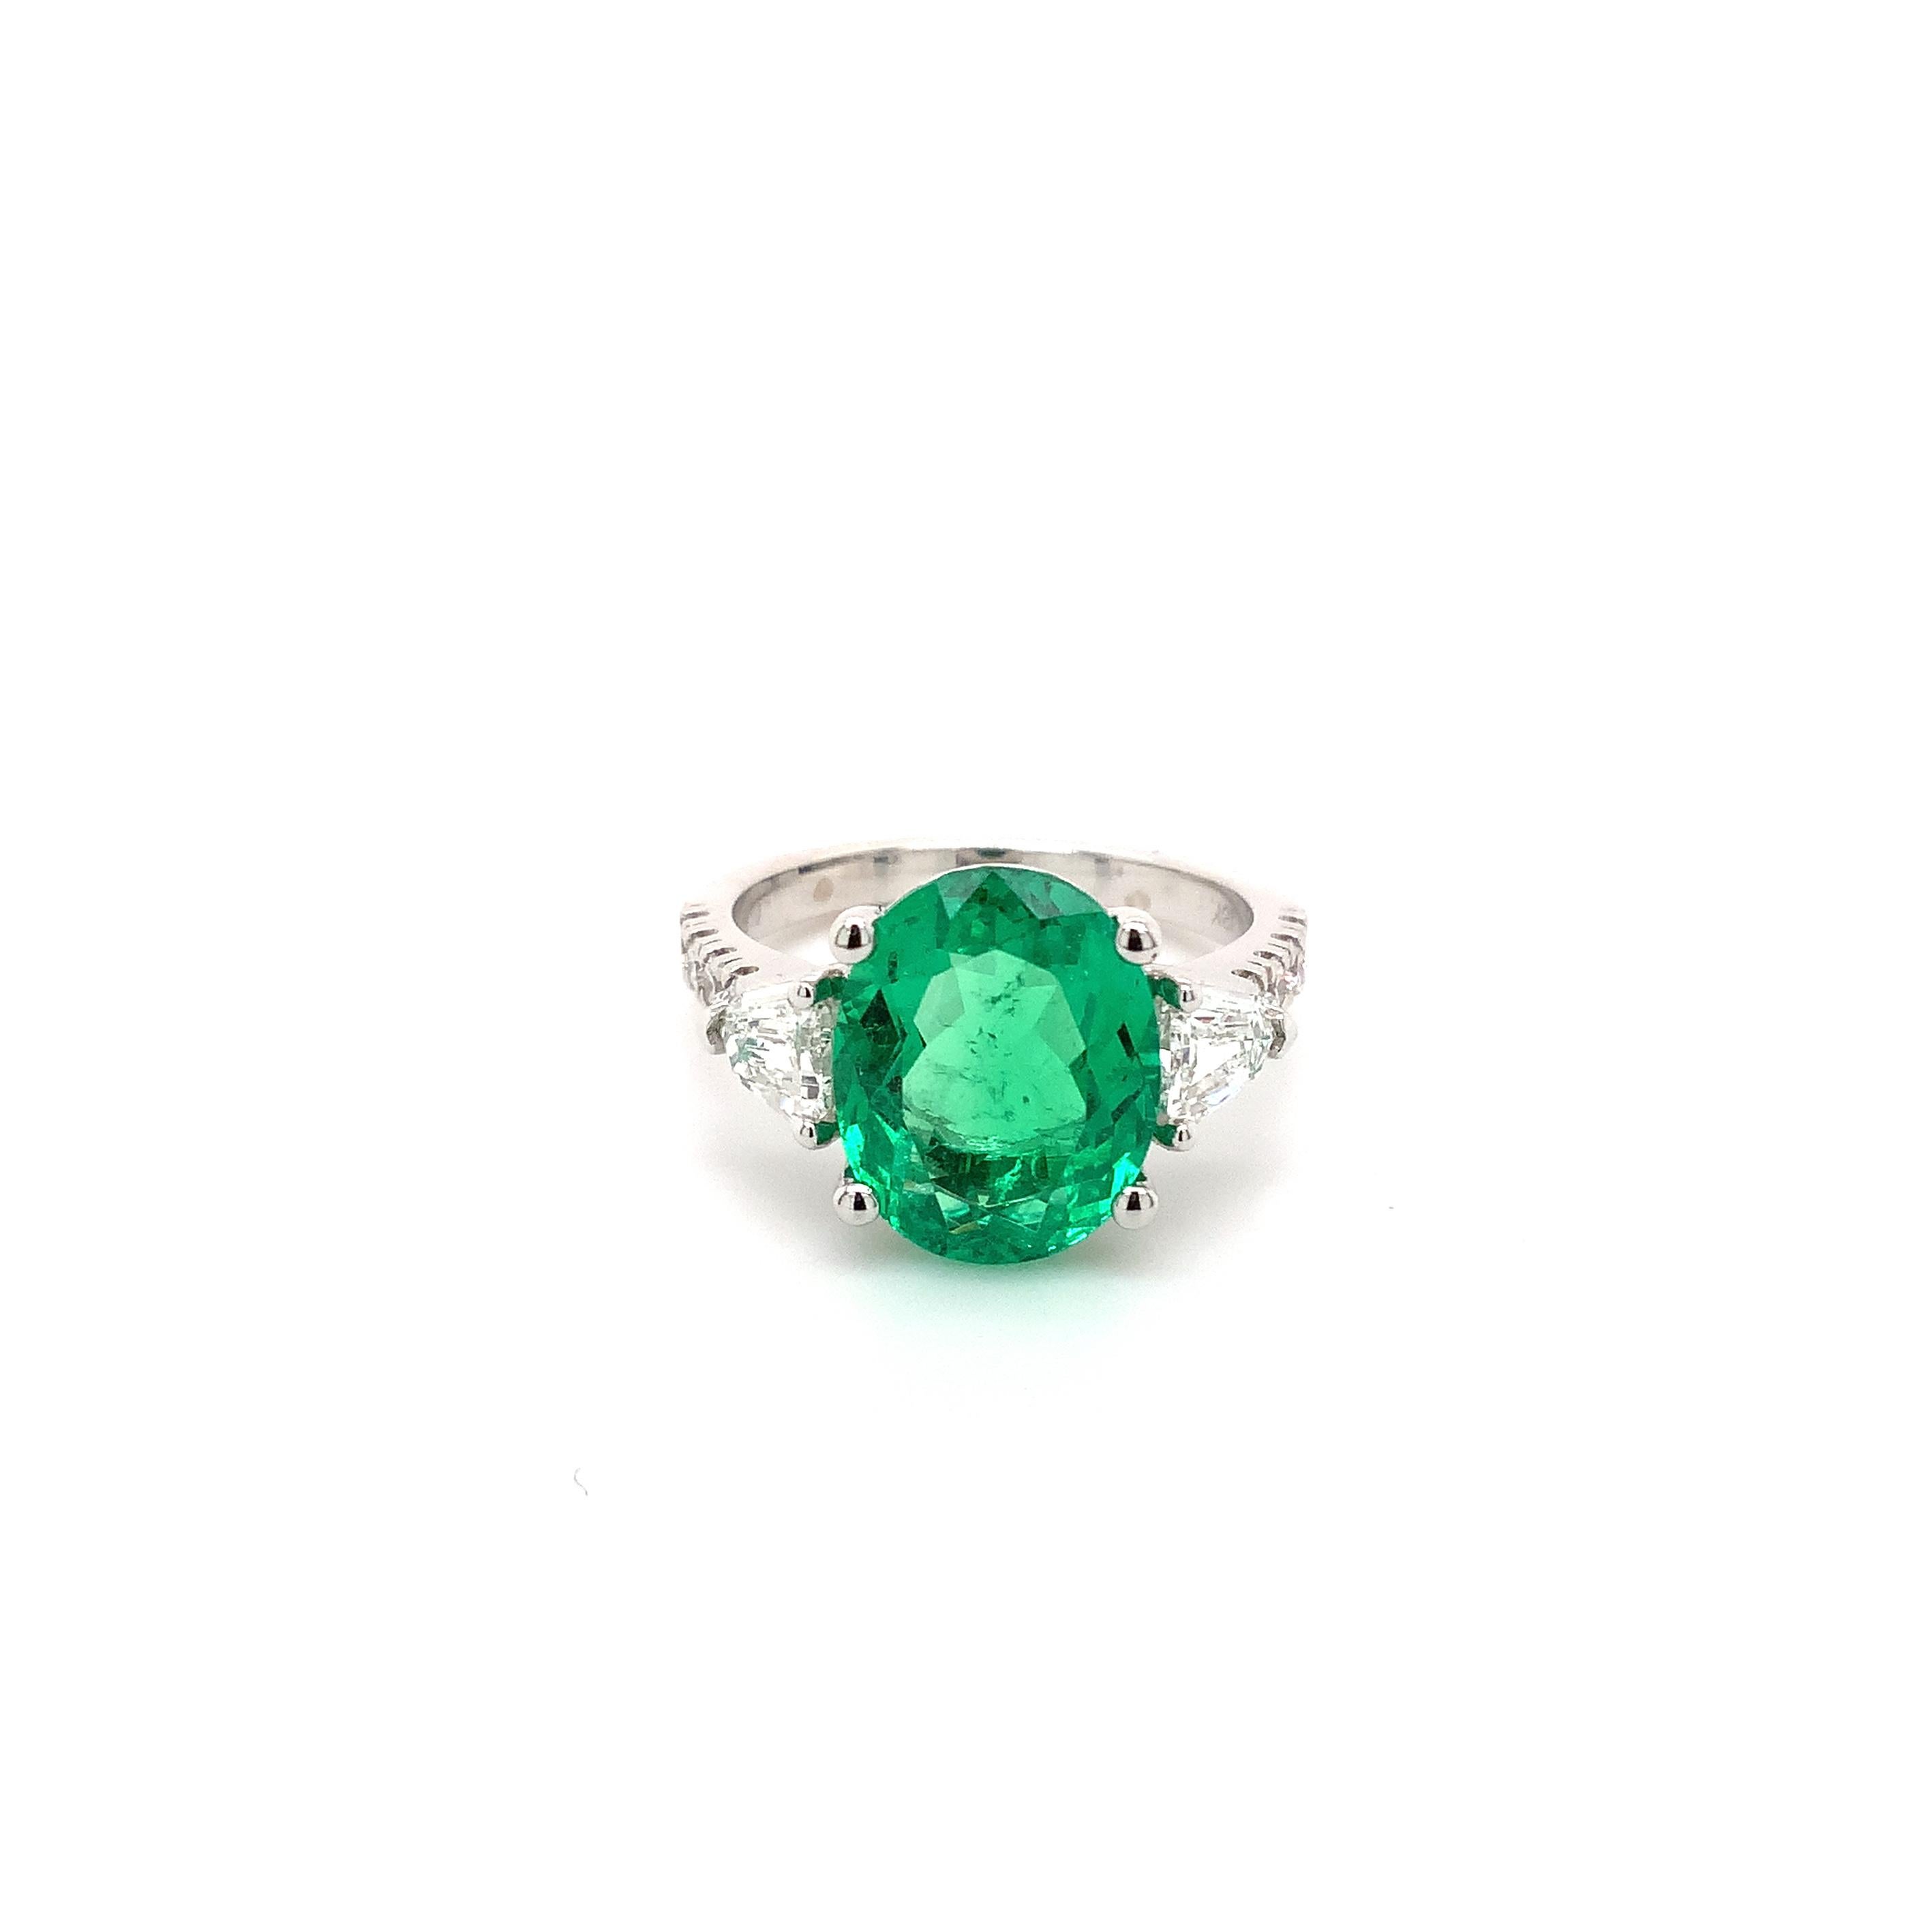 This One Of A Kind Natural Fine Colombian Emerald And Diamond Ring is Set in 18K White Gold 4 Prong Setting.
One Oval Mix Cut  Emerald Equal 3.60 cts tw. 12x9.5mm 
2 Bullet Shaped Step Cut Diamonds 0.60 cts
8  Round Brilliant Cut Diamonds 0.25